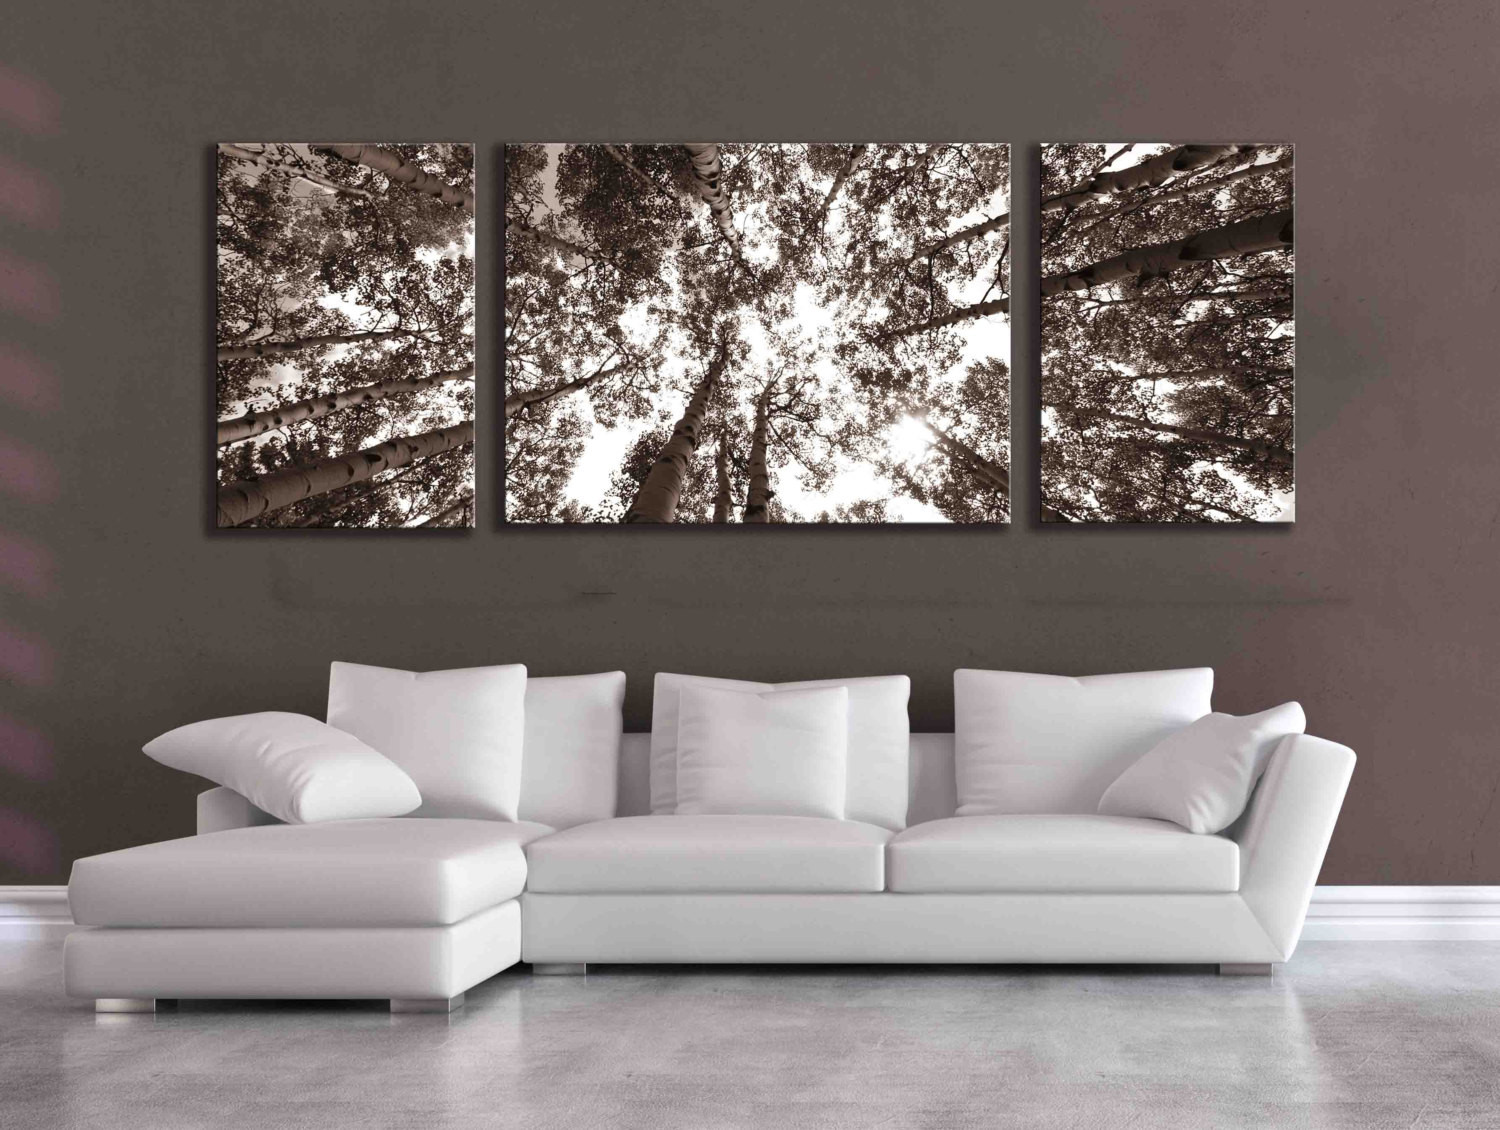 Best ideas about 3 Panel Wall Art . Save or Pin sepia three panel multi piece aspen birch tree nature Now.